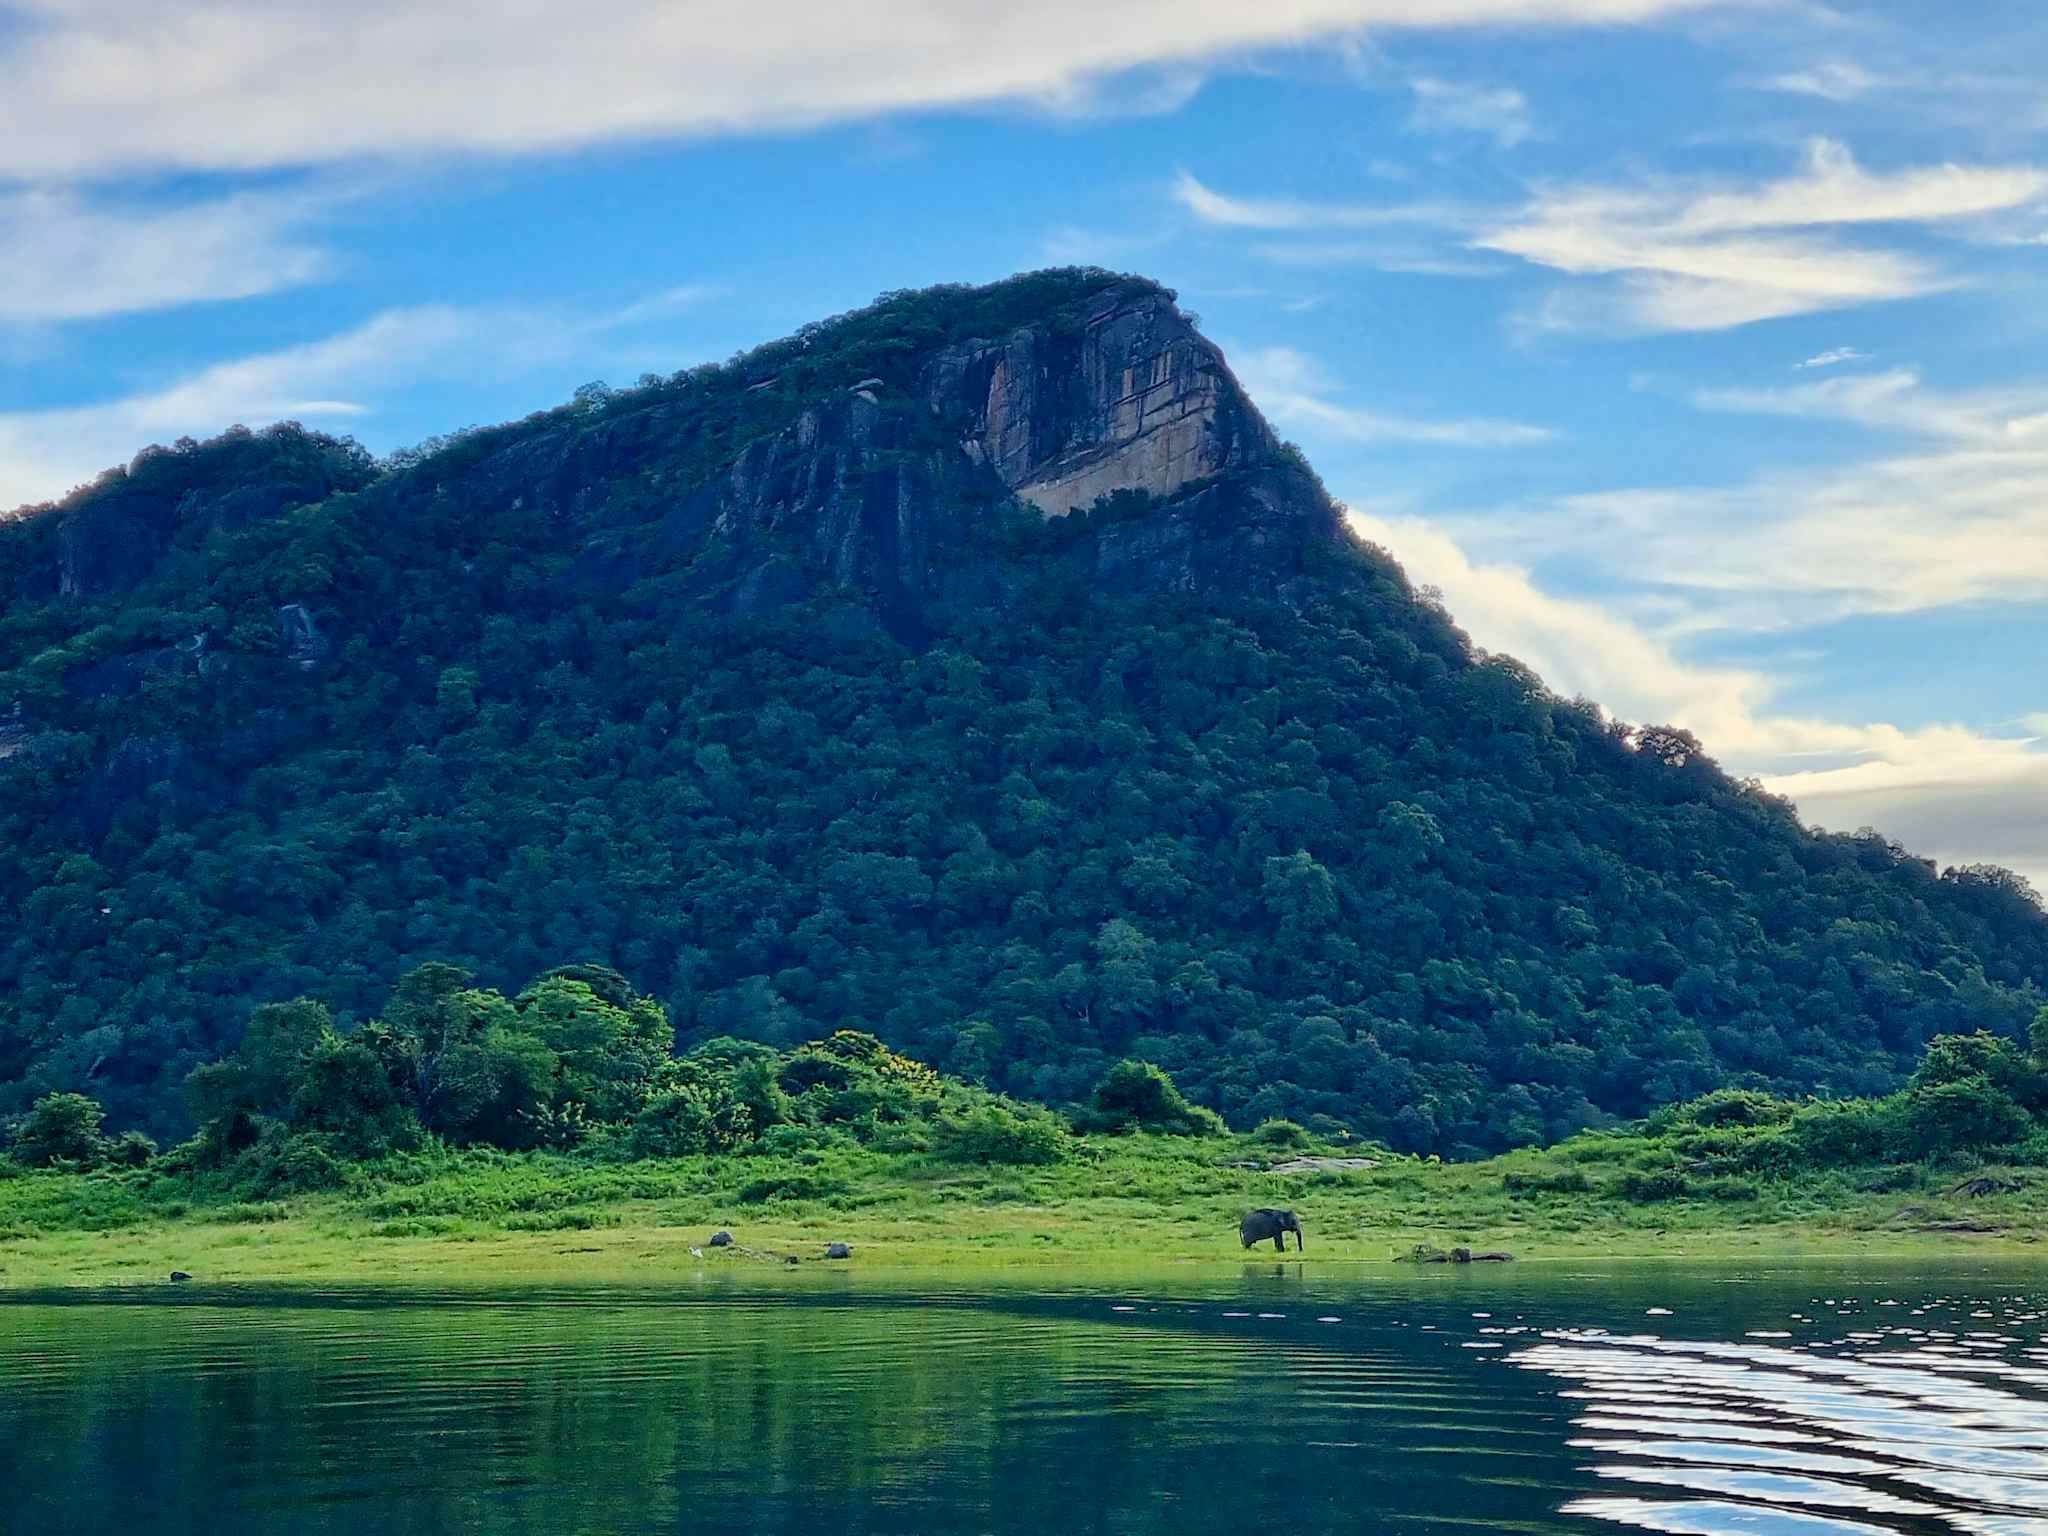 Views of forested mountains and an elephant by the river in Sri Lanka.